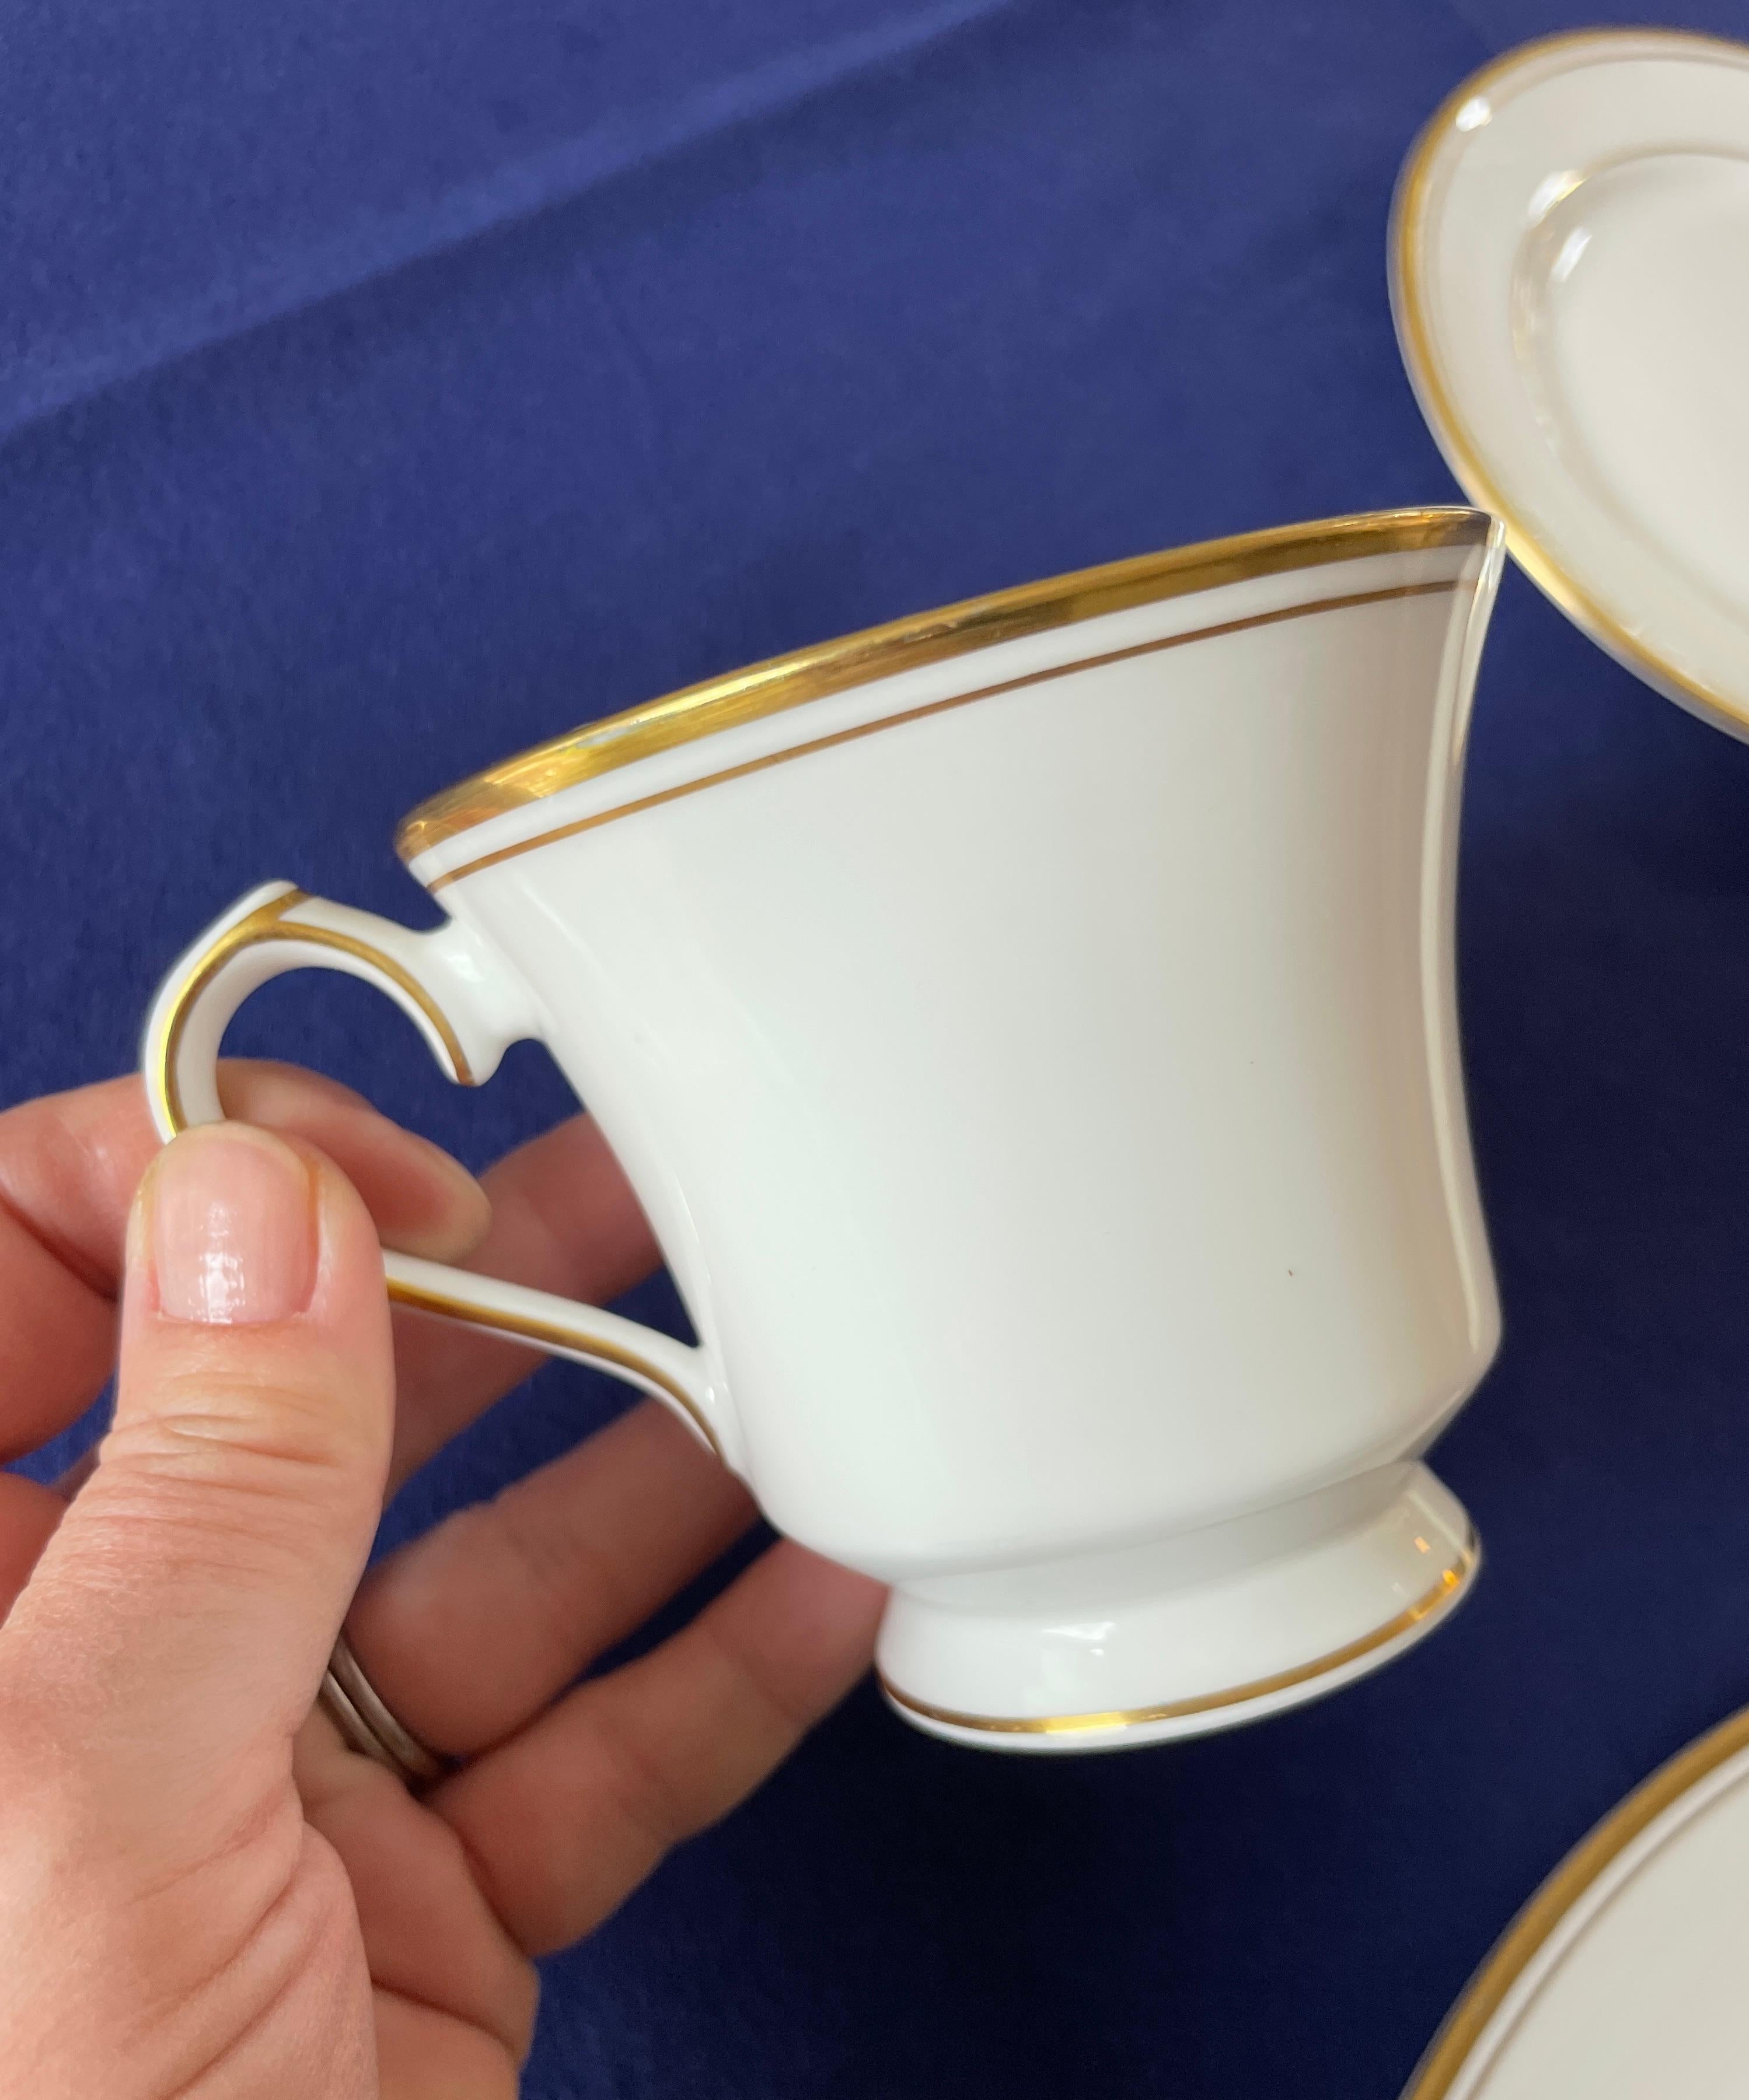 Aynsley fine porcelain table service, Corona gold model, 12 people
This Fine Bone China table service includes 12 plates, 12 small cheese or dessert plates, 12 salad plates, 12 soup, cereal or dessert cups, 12 tea or coffee cups and saucers.
This is